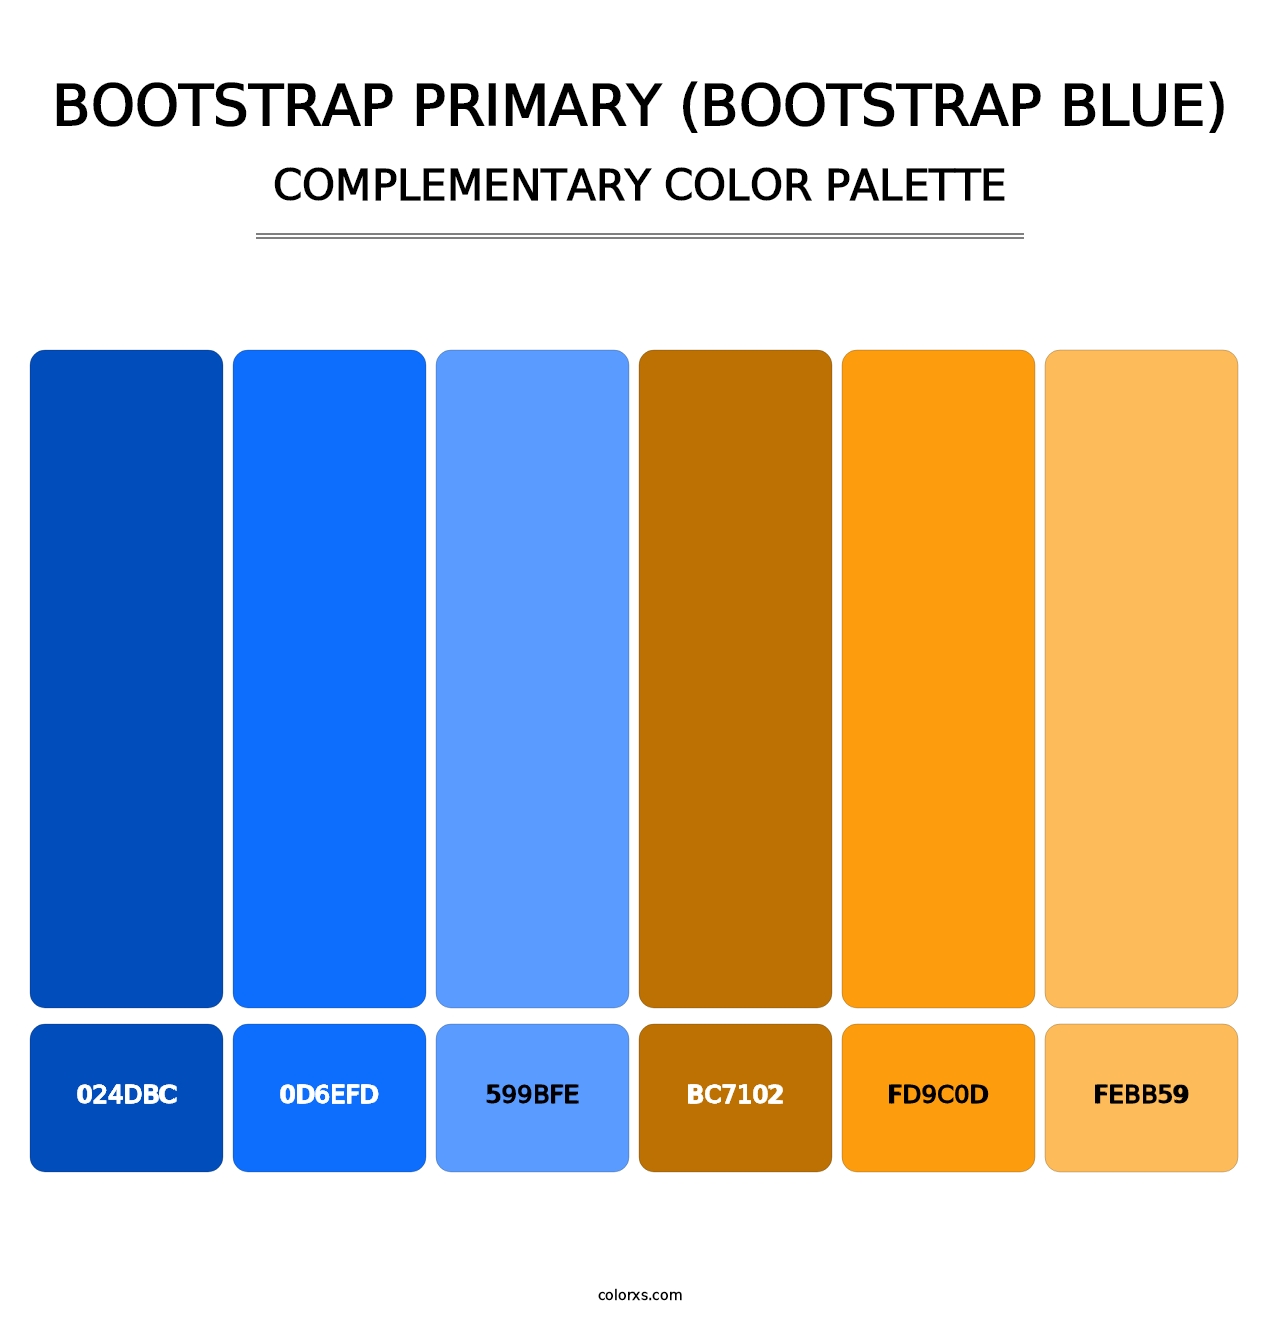 Bootstrap Primary (Bootstrap Blue) - Complementary Color Palette